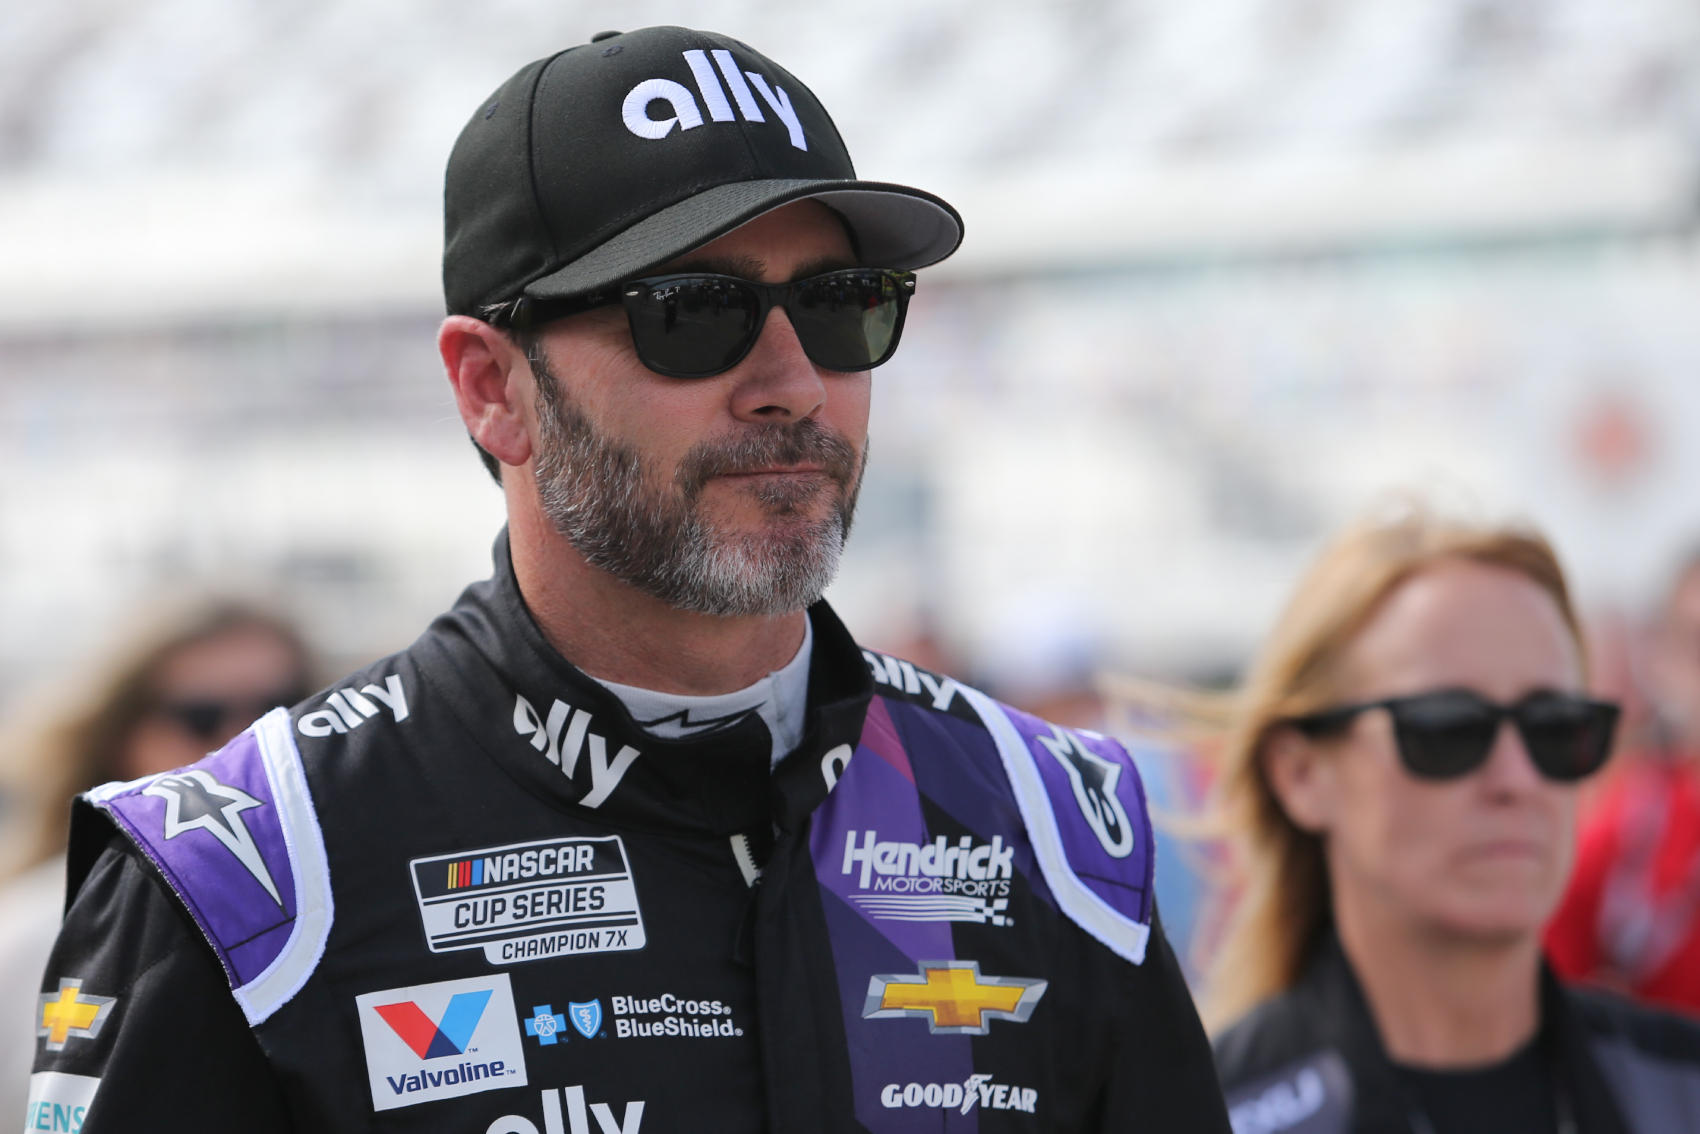 Jimmie Johnson had a legendary NASCAR career. However, he recently made a big announcement about his new IndyCar series career.